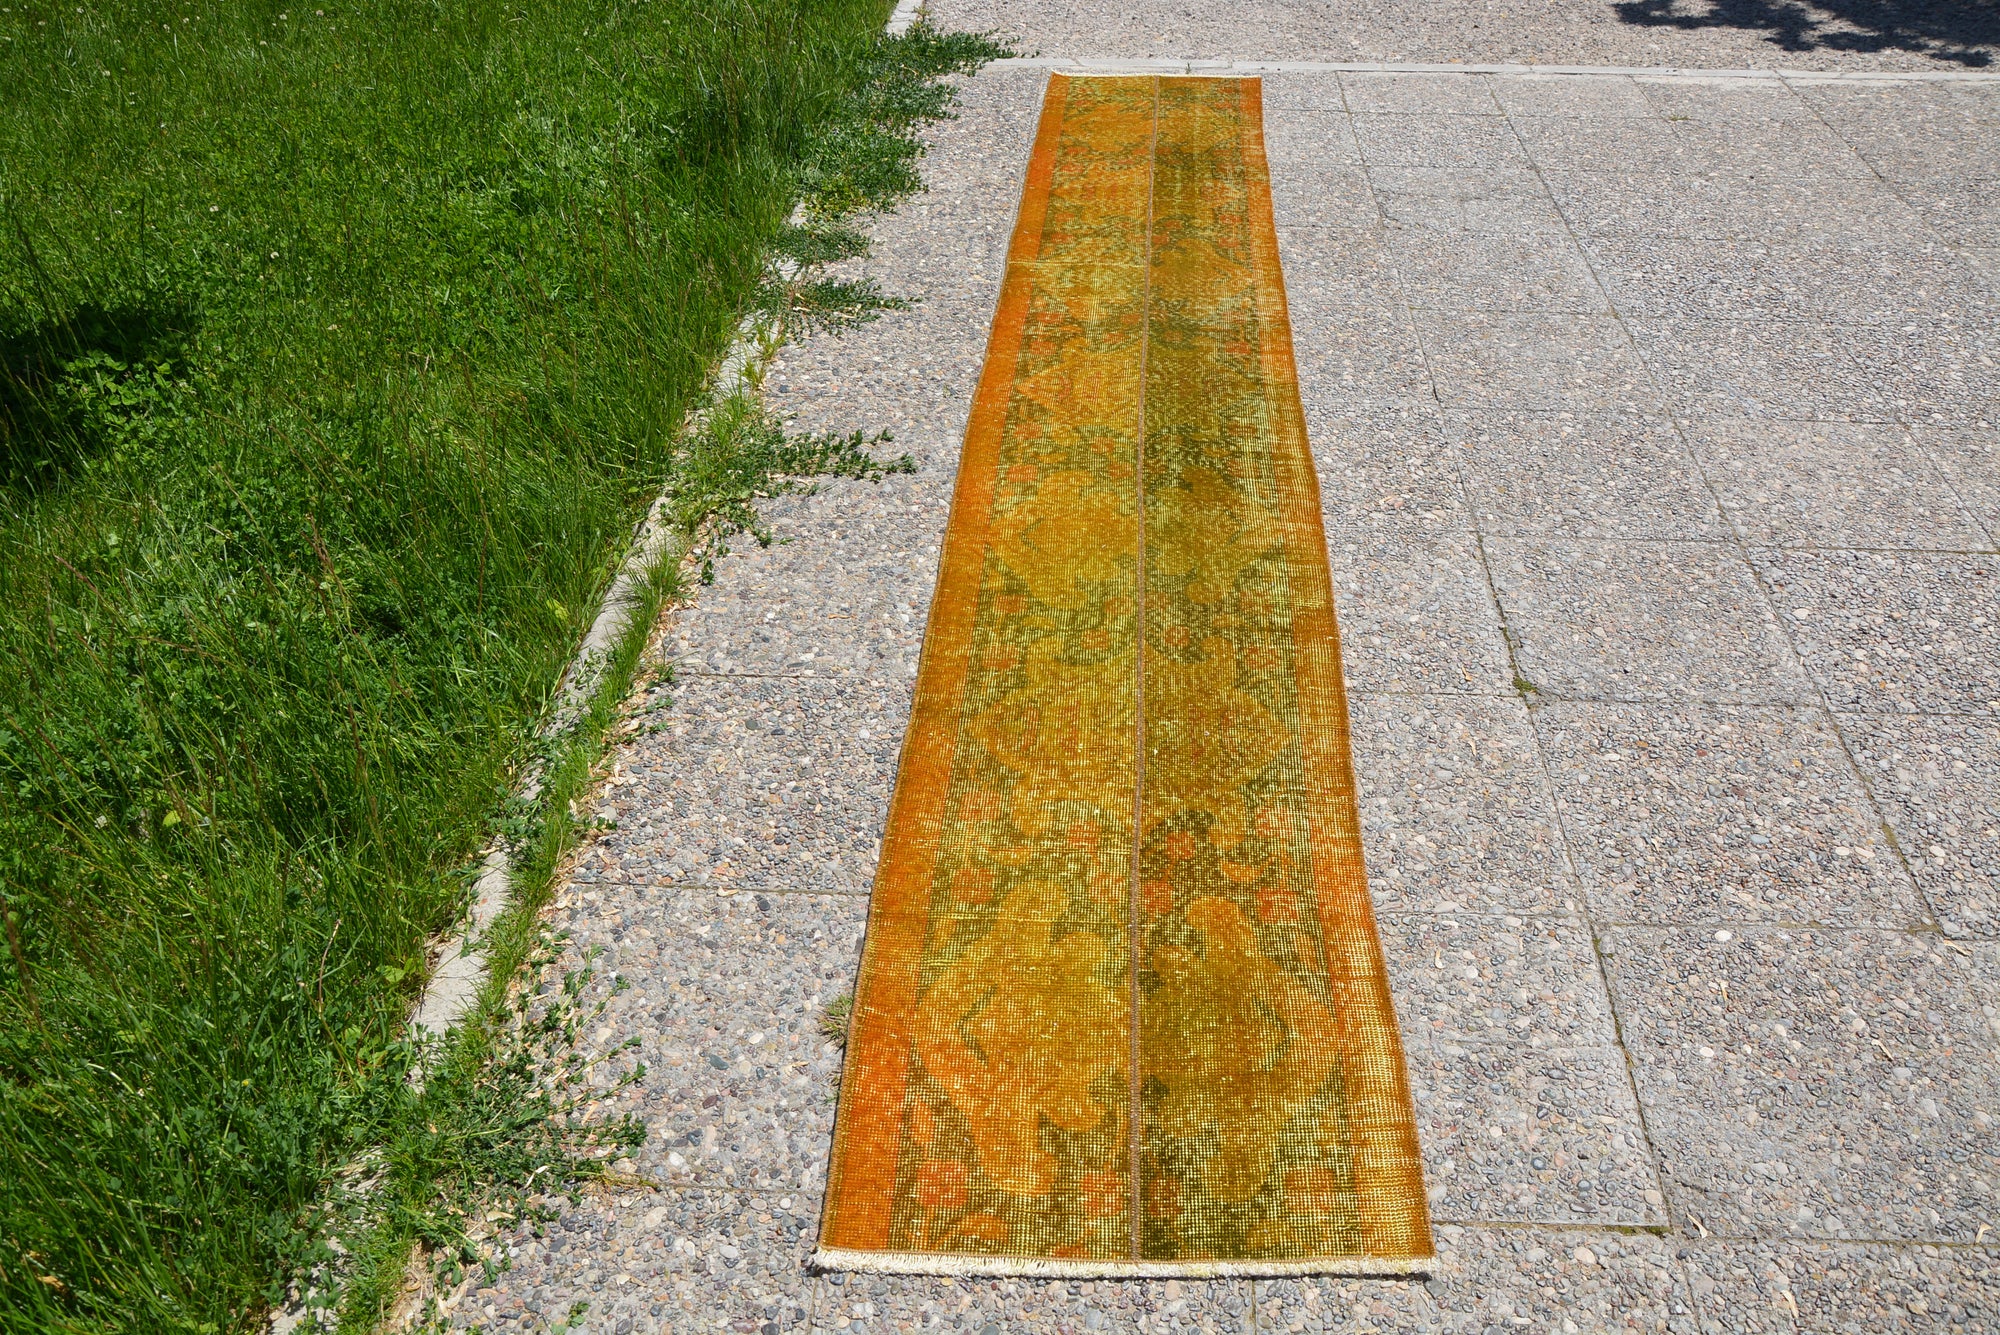 Yellow Hand Knotted Rug, Rug Runner, Colorful Rug, Antique Rug, Golden Living Room Rug, Hand Woven Rug, Persian Rugs,  1.8 x 11.5 Feet LQ074